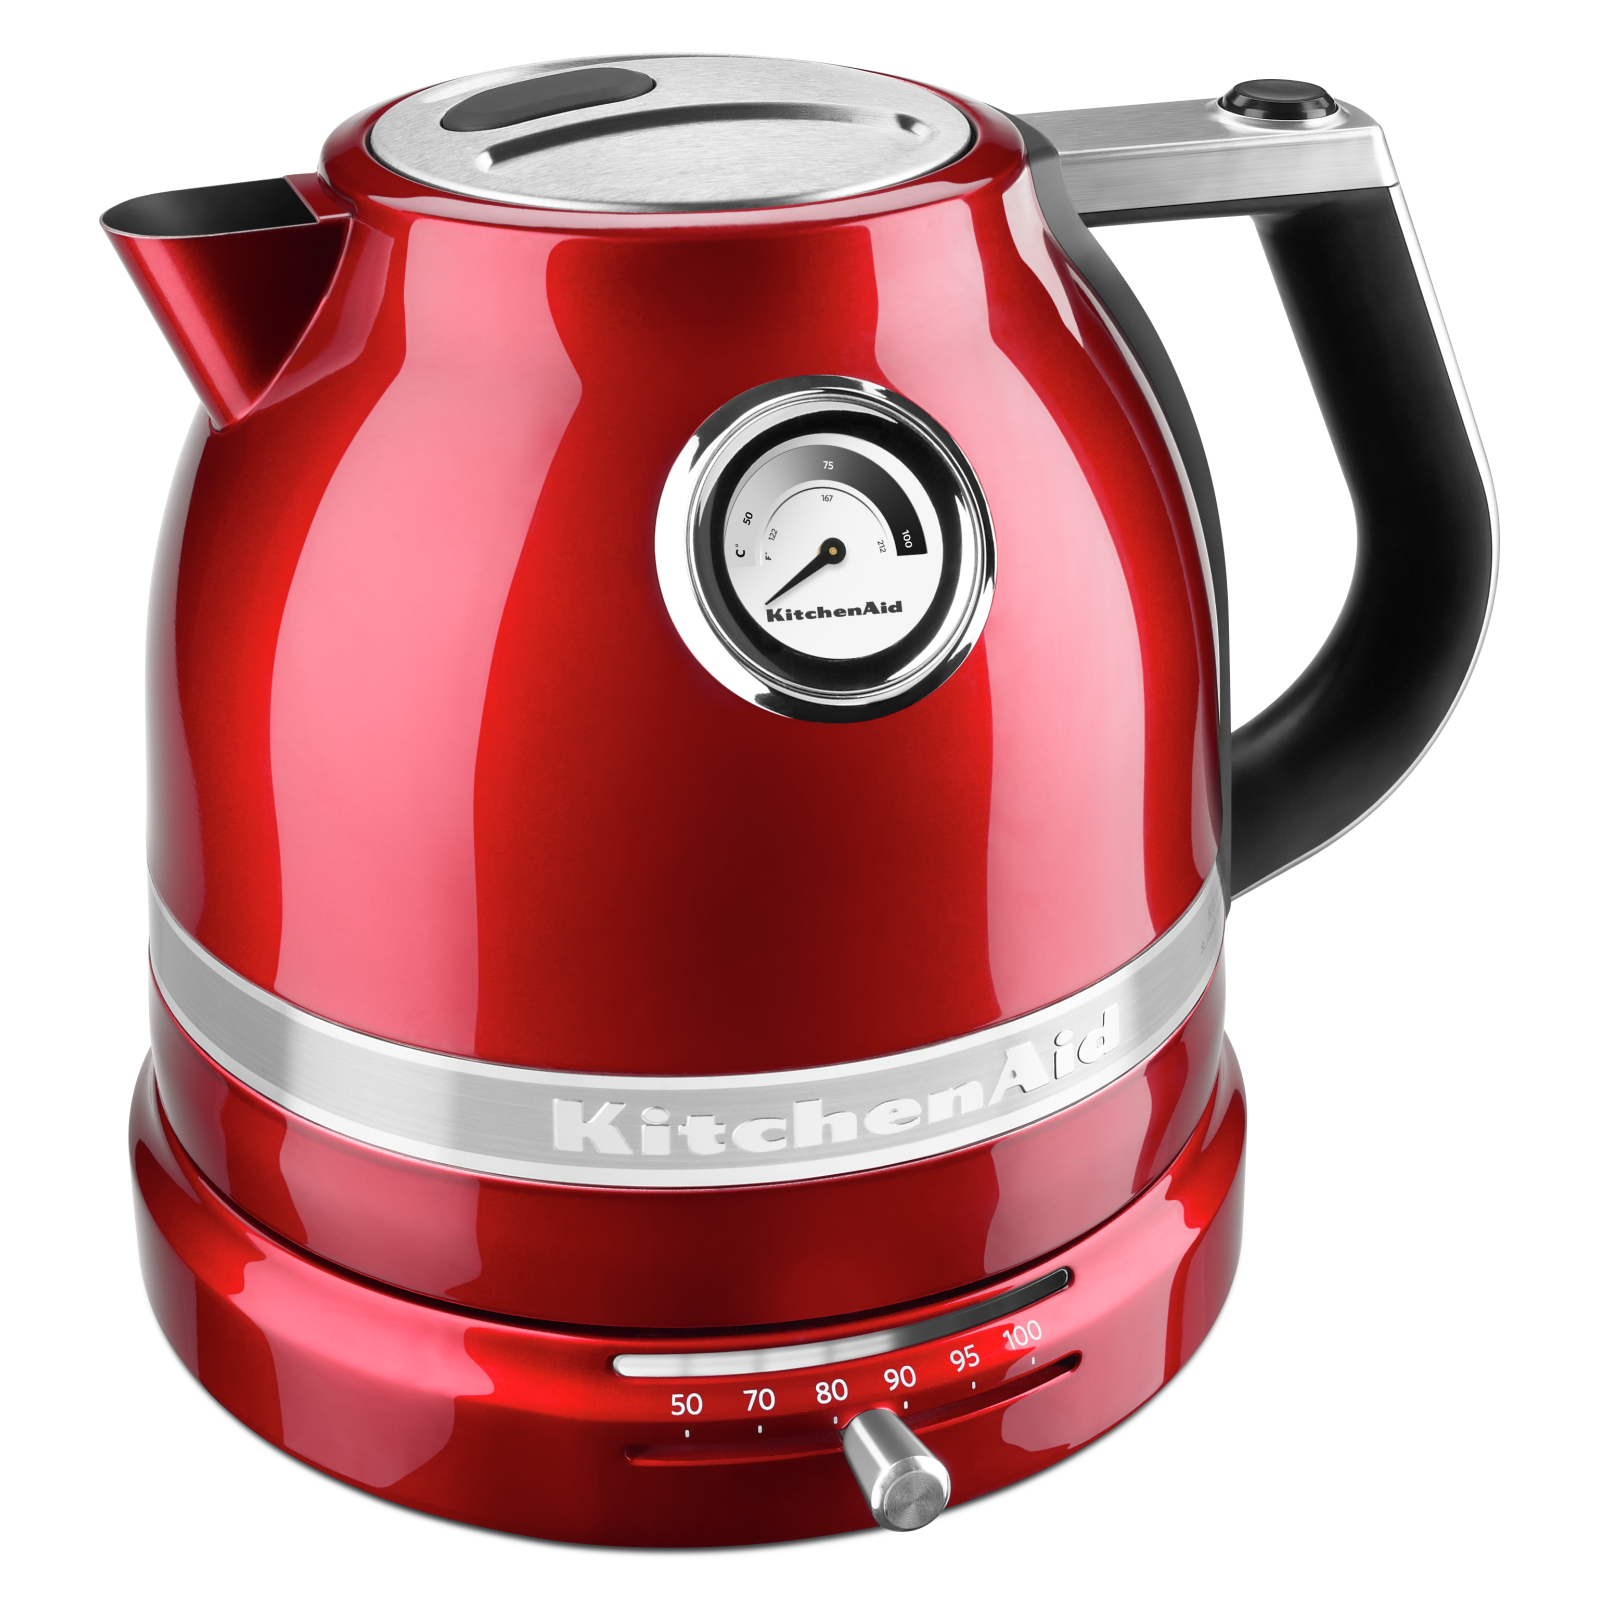 KitchenAid - No Pro Line Series Electric Kettle in Red - KEK1522CA